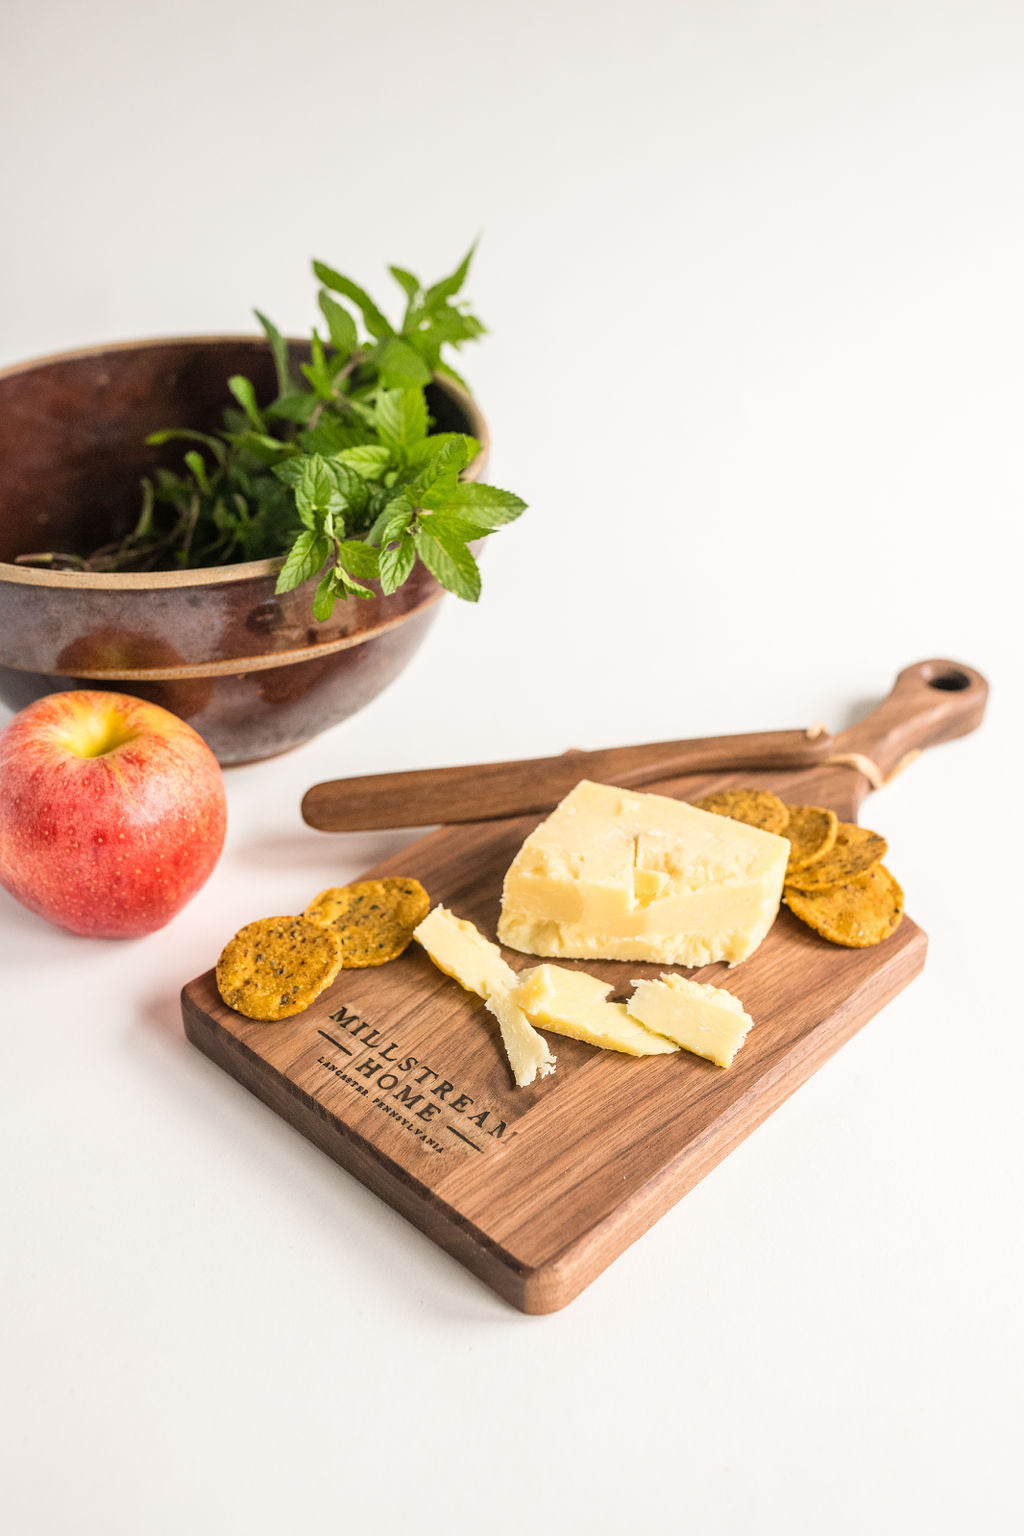 Walnut Cheese Board with Cheese and Crackers on Top